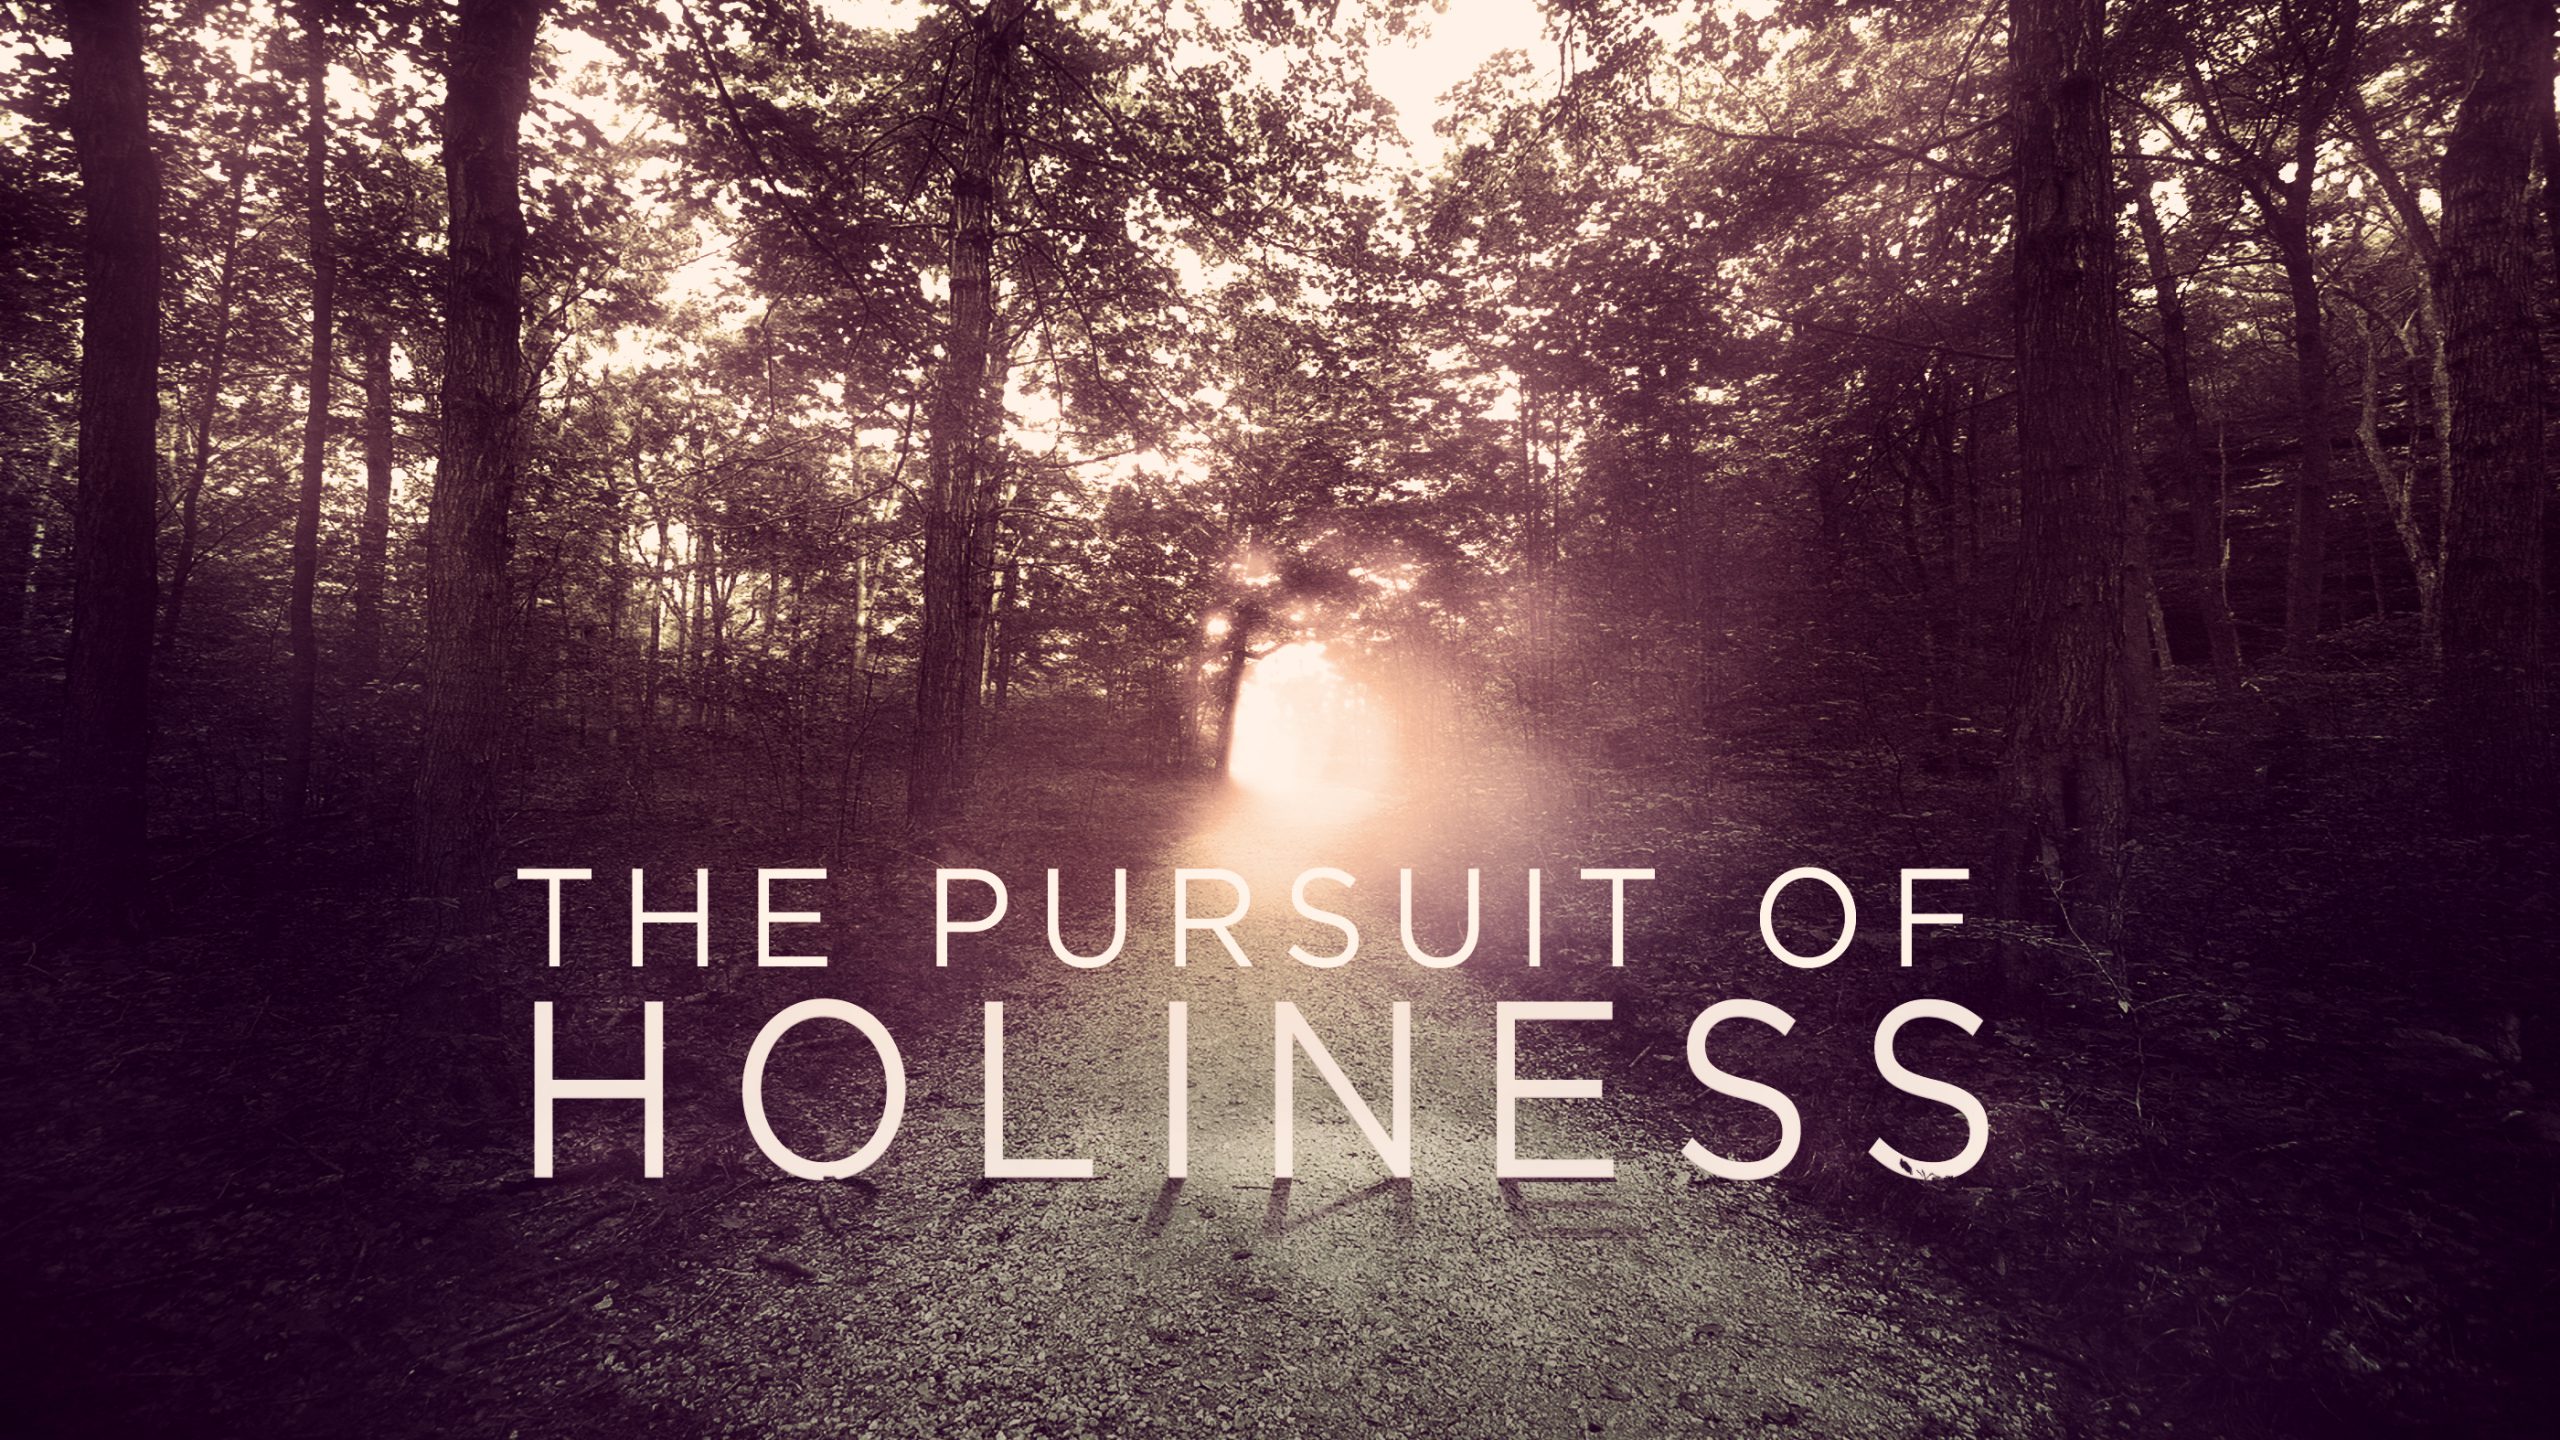 Whatever Happened to Holiness?